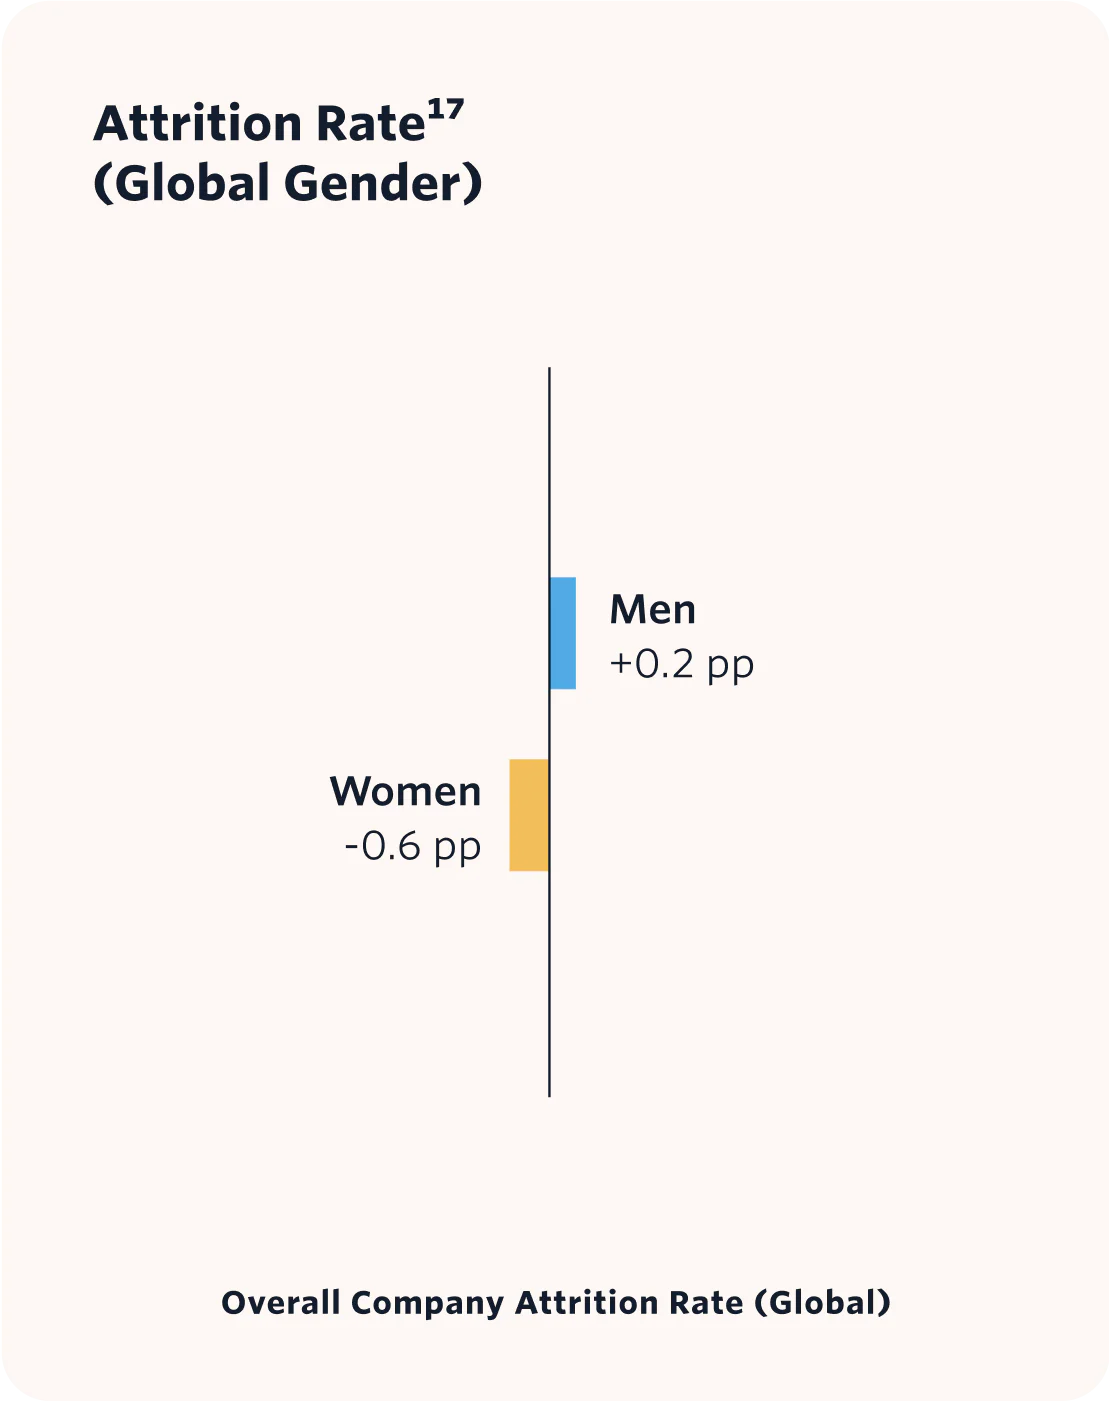 Attrition Rate (Global Gender) data represented in a bar chart.